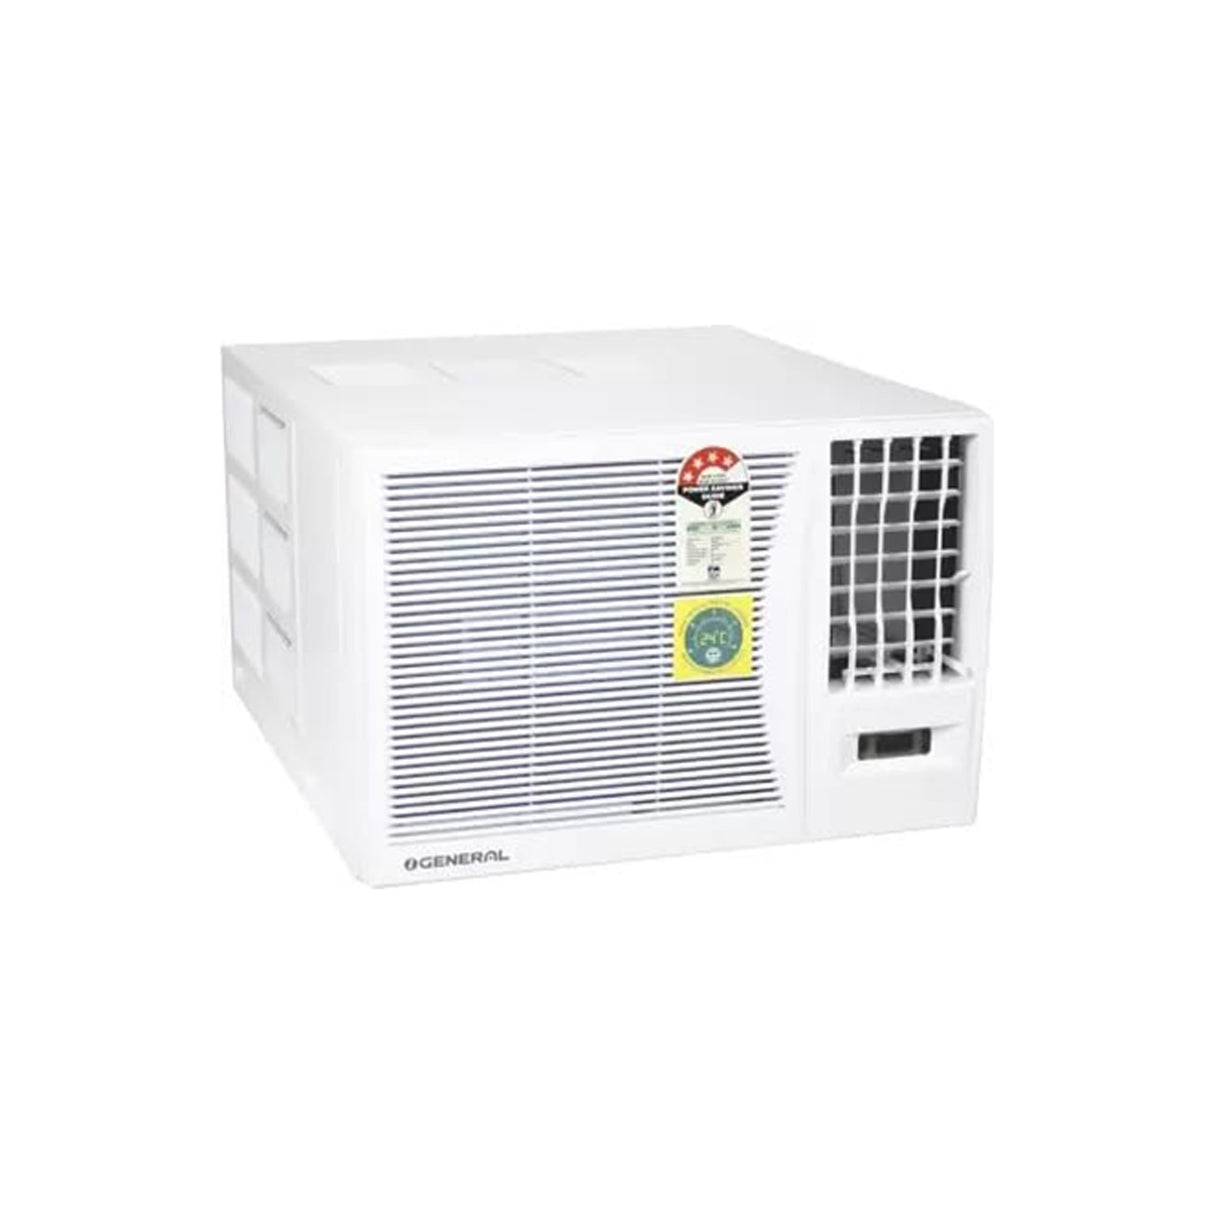 Optimal comfort with the best air conditioner - OGENERAL 4 Star Window AC.